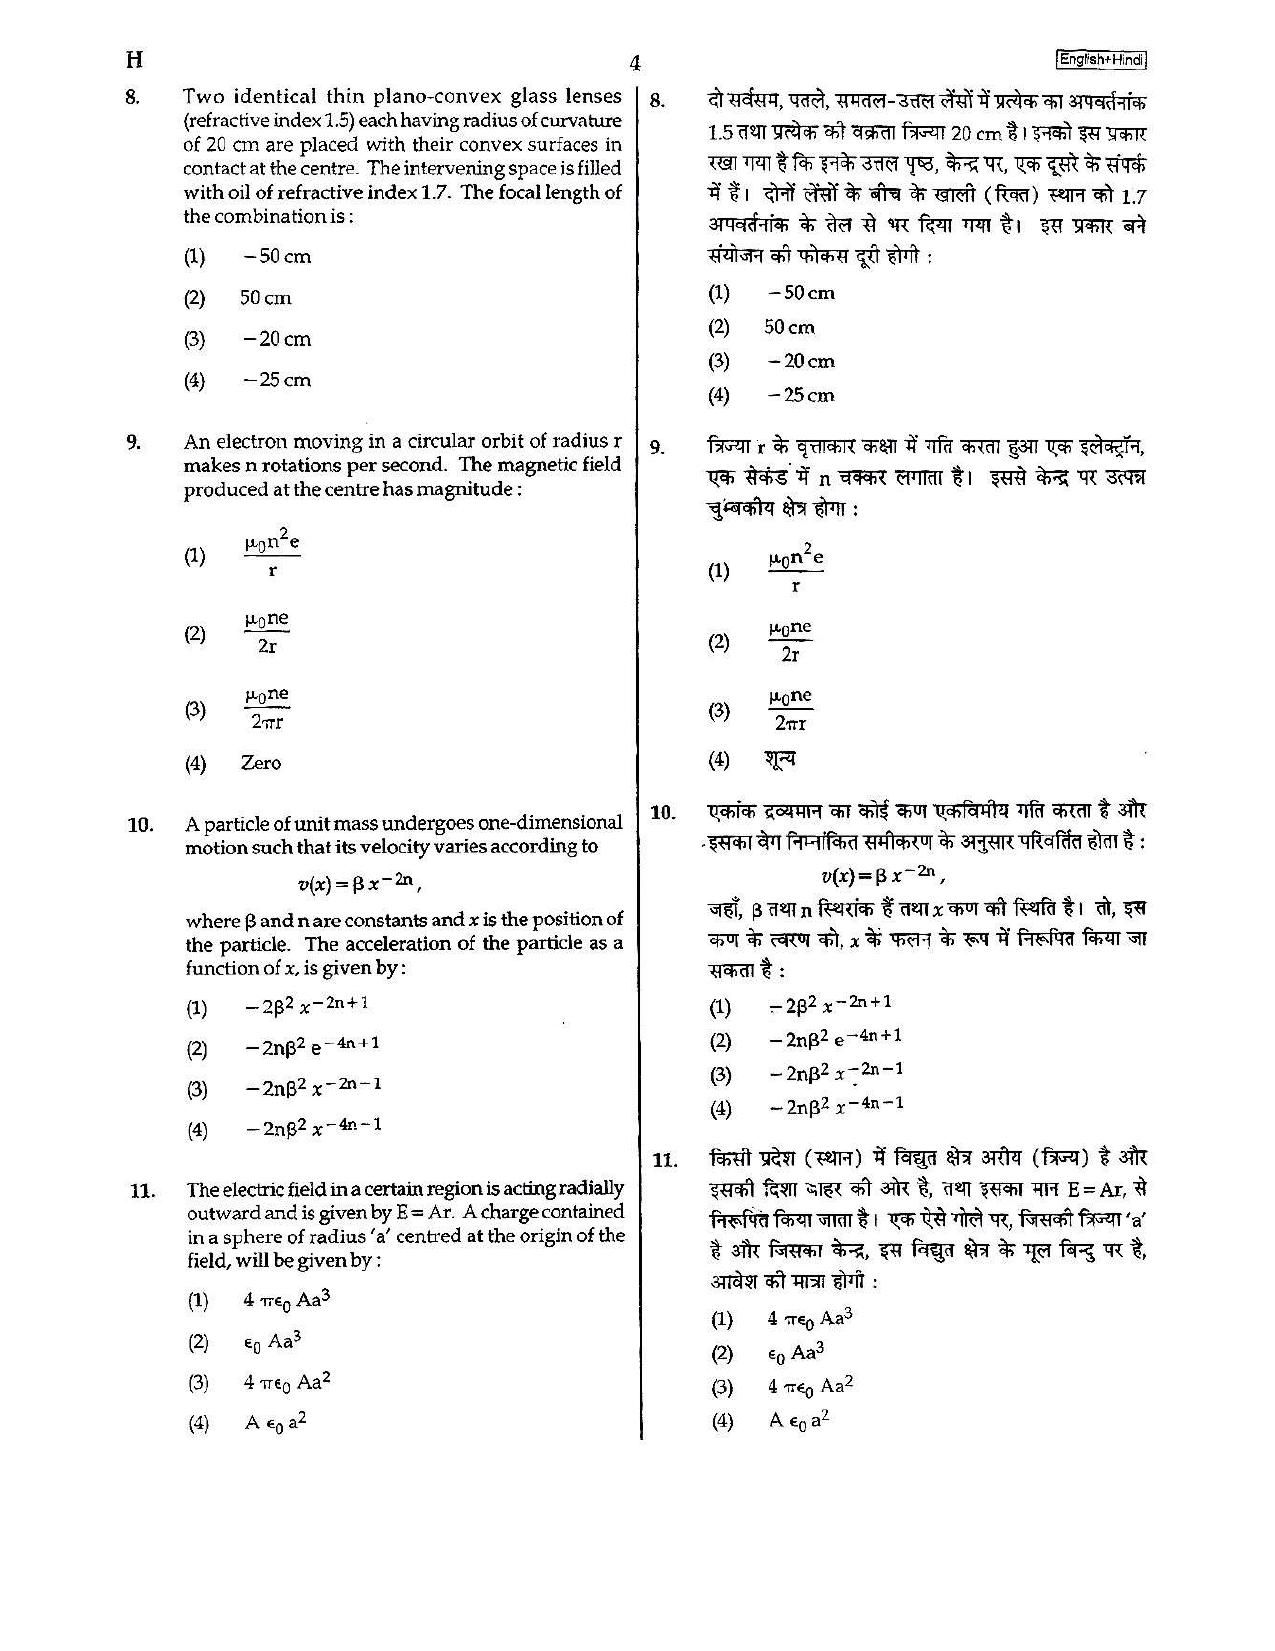 NEET Code H 2015 Question Paper - Page 4